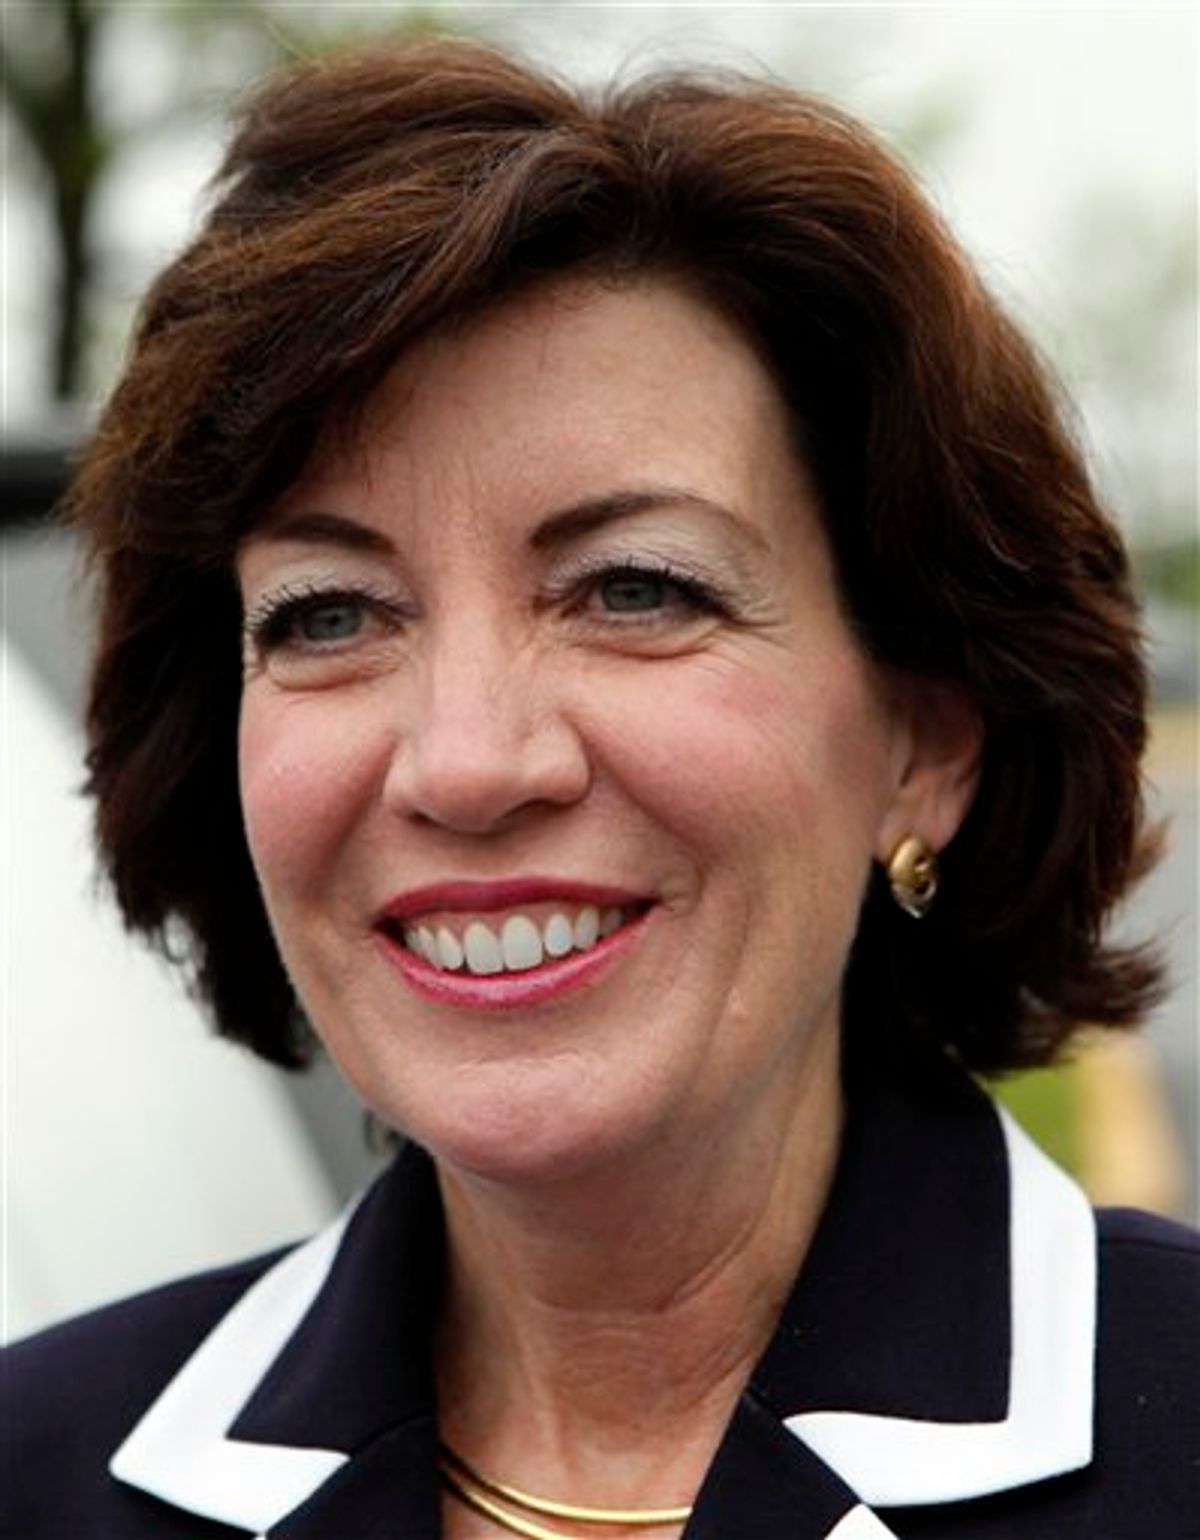 Democratic candidate for the 26th District Congressional seat, Kathy Hochul arrives at a campaign stop at a restaurant in Amherst, N.Y., Tuesday, May 24, 2011.   Hochul is running against Republican Jane Corwin and tea party candidate Jack Davis in the race to succeed Republican Chris Lee. Lee resigned in February after shirtless photos surfaced that he'd sent to a woman on Craigslist. (AP Photo/David Duprey) (AP)